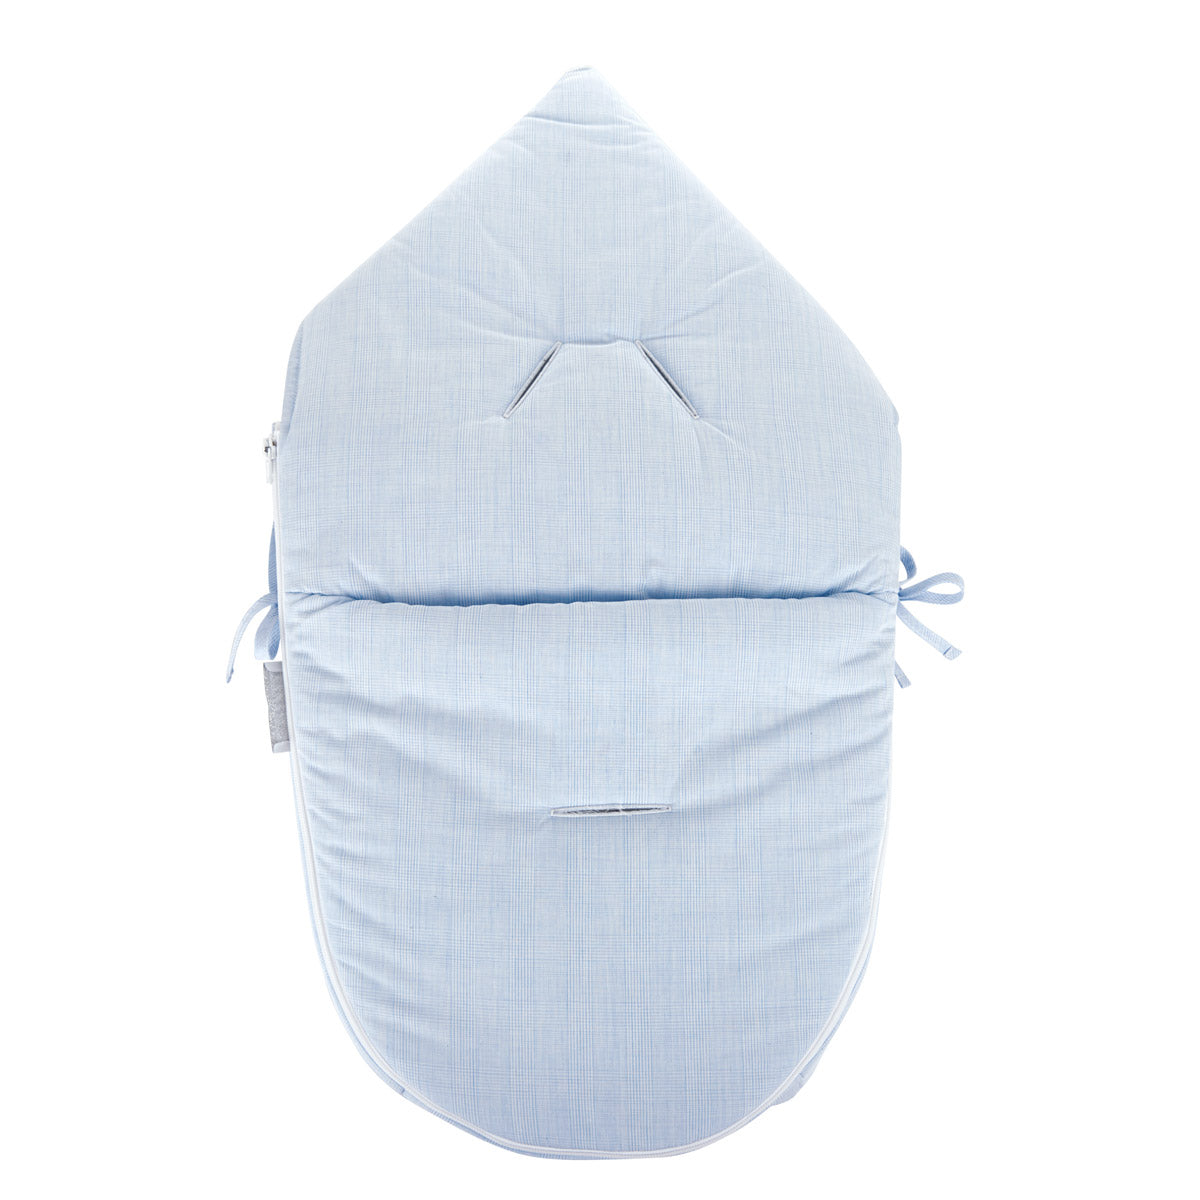 Theophile & Patachou Hooded Sleeping Bag for Car Seat “Pebble+” - Sweet Blue